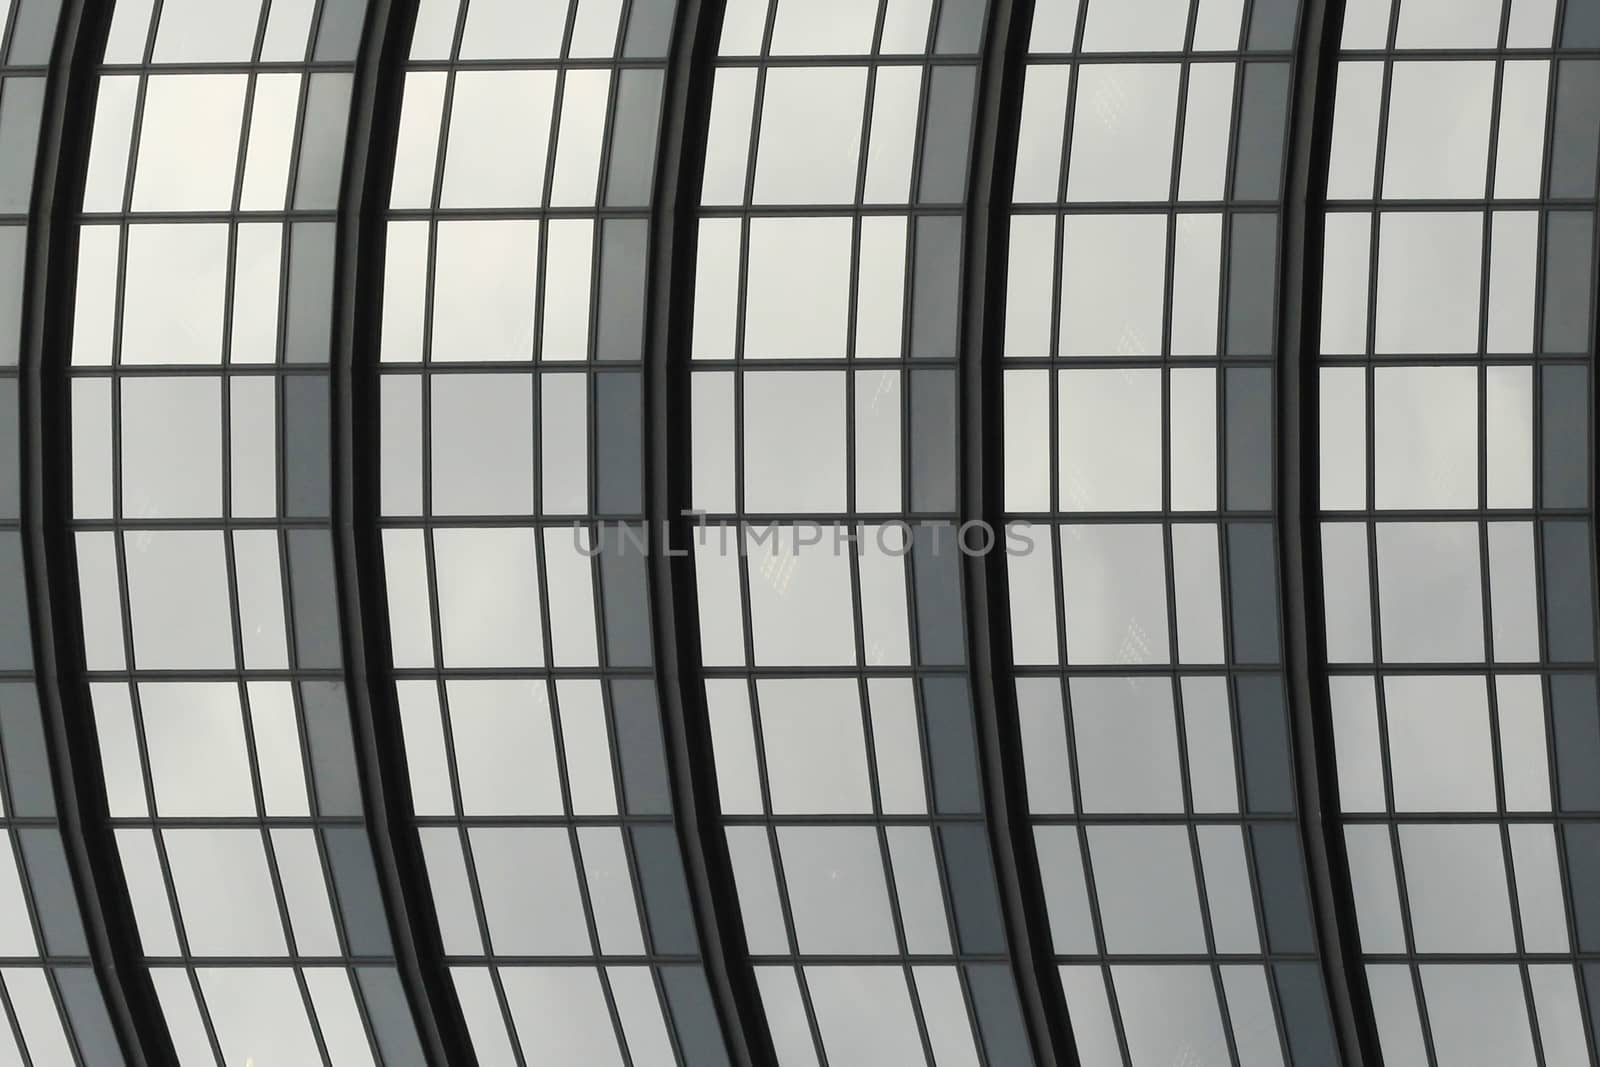 Windows in a modern office building create an interesting texture for the designer